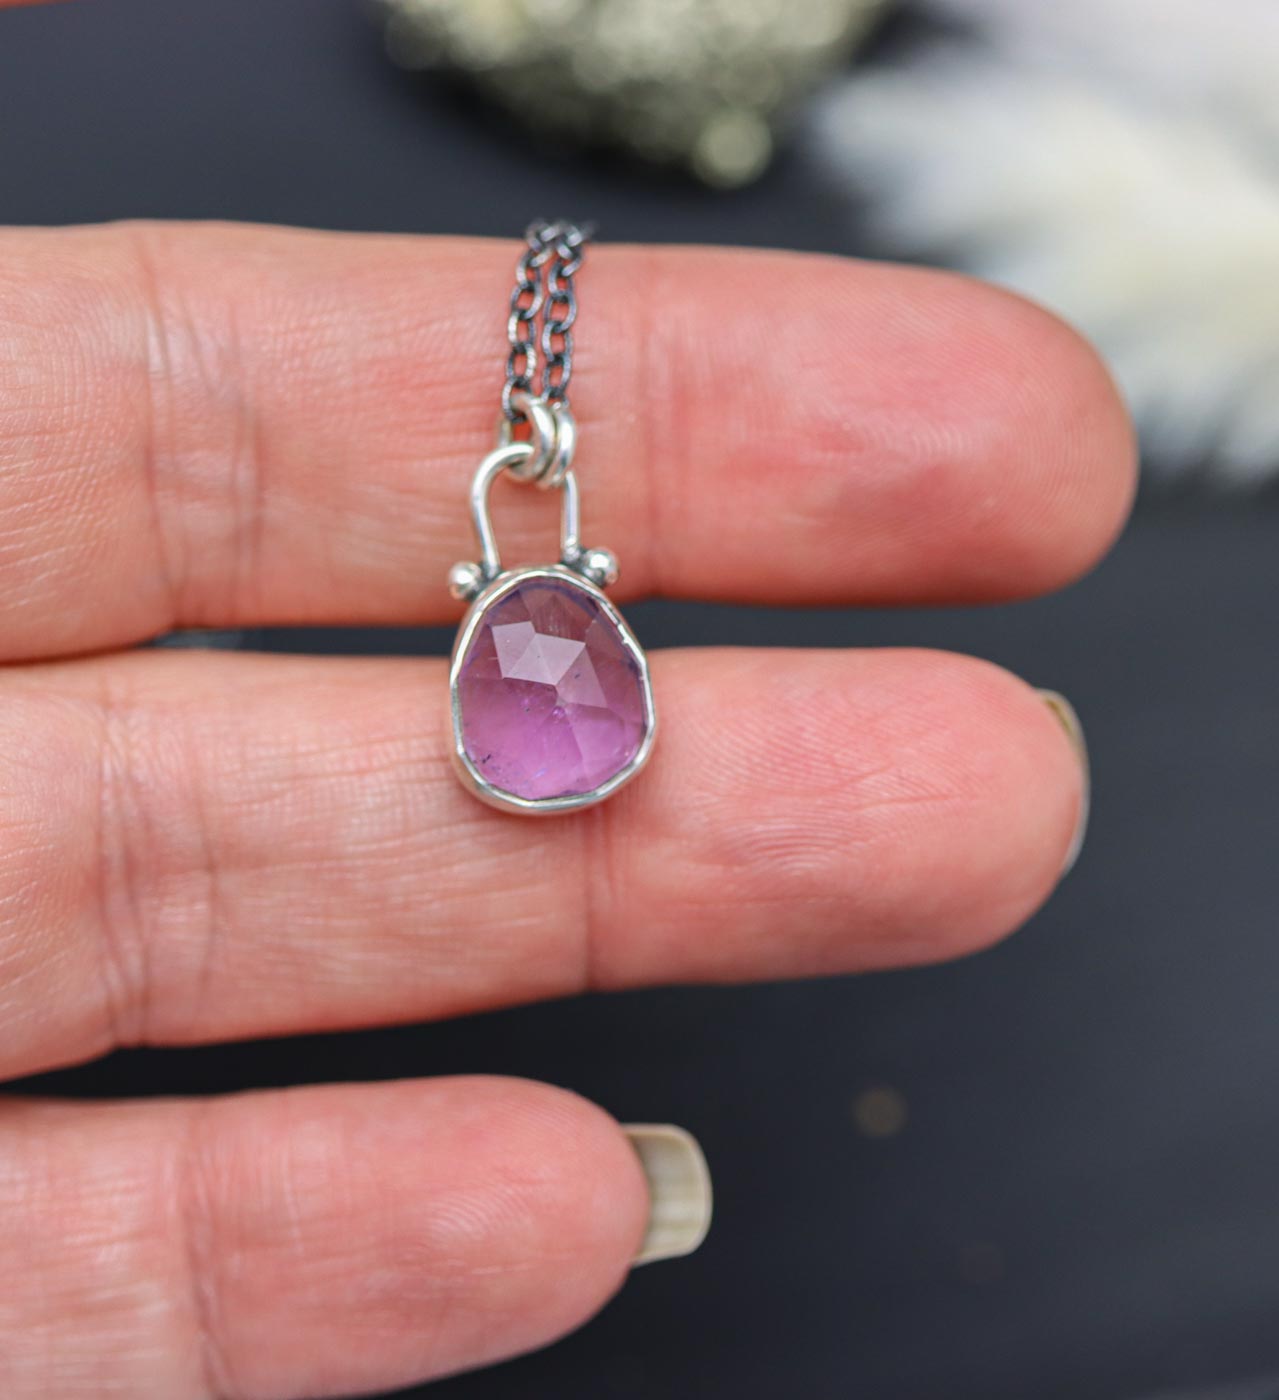 Amethyst Pendant Necklace Sterling Silver